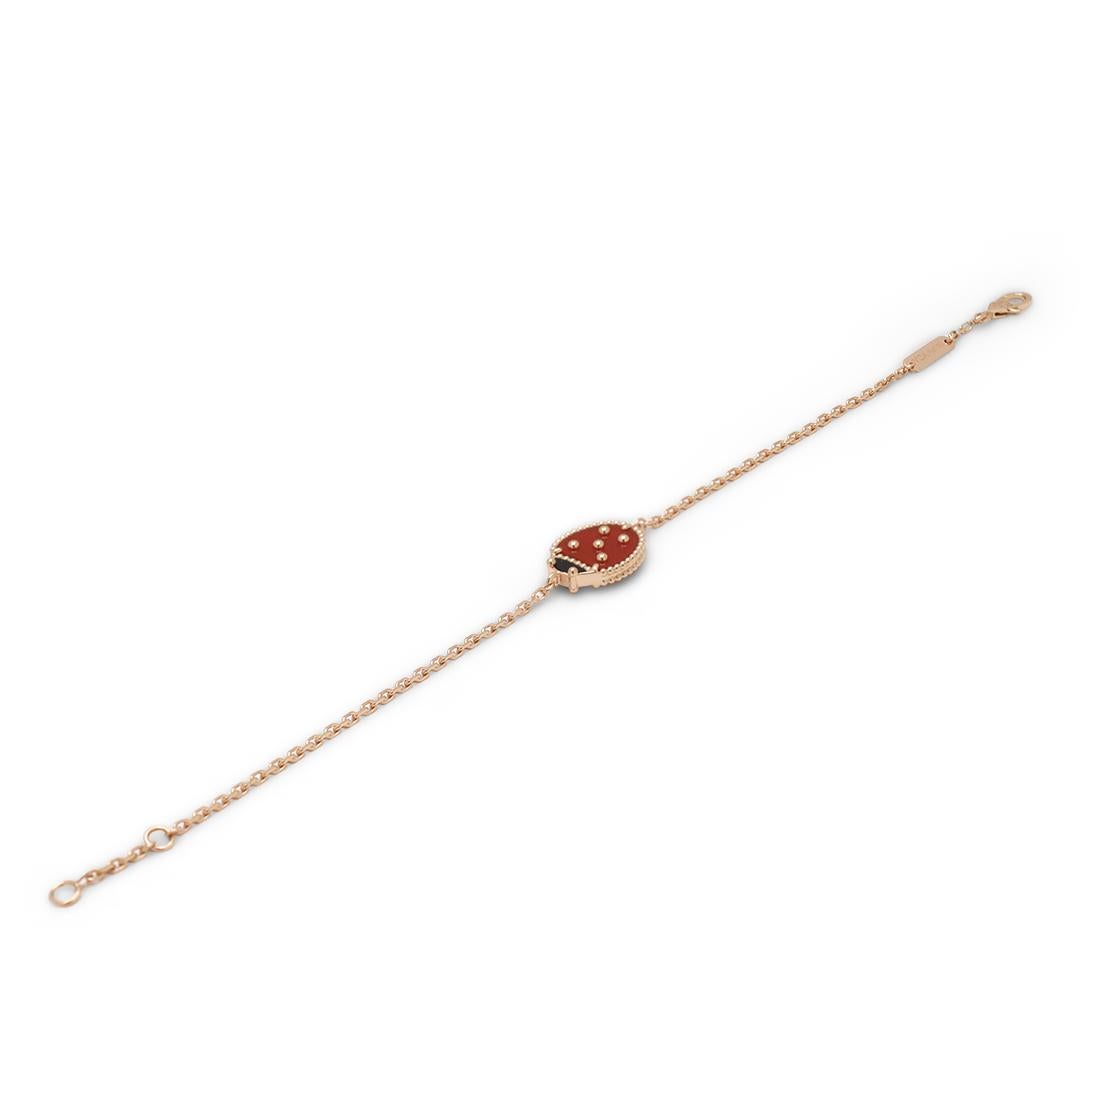 Authentic Van Cleef & Arpels 'Lucky Spring' bracelet crafted in 18 karat rose gold features a single closed wings ladybug motif set with carved carnelian and onyx. The adjustable chain measures 6 3/4 (17cm) in length. Signed VCA, 750, with serial